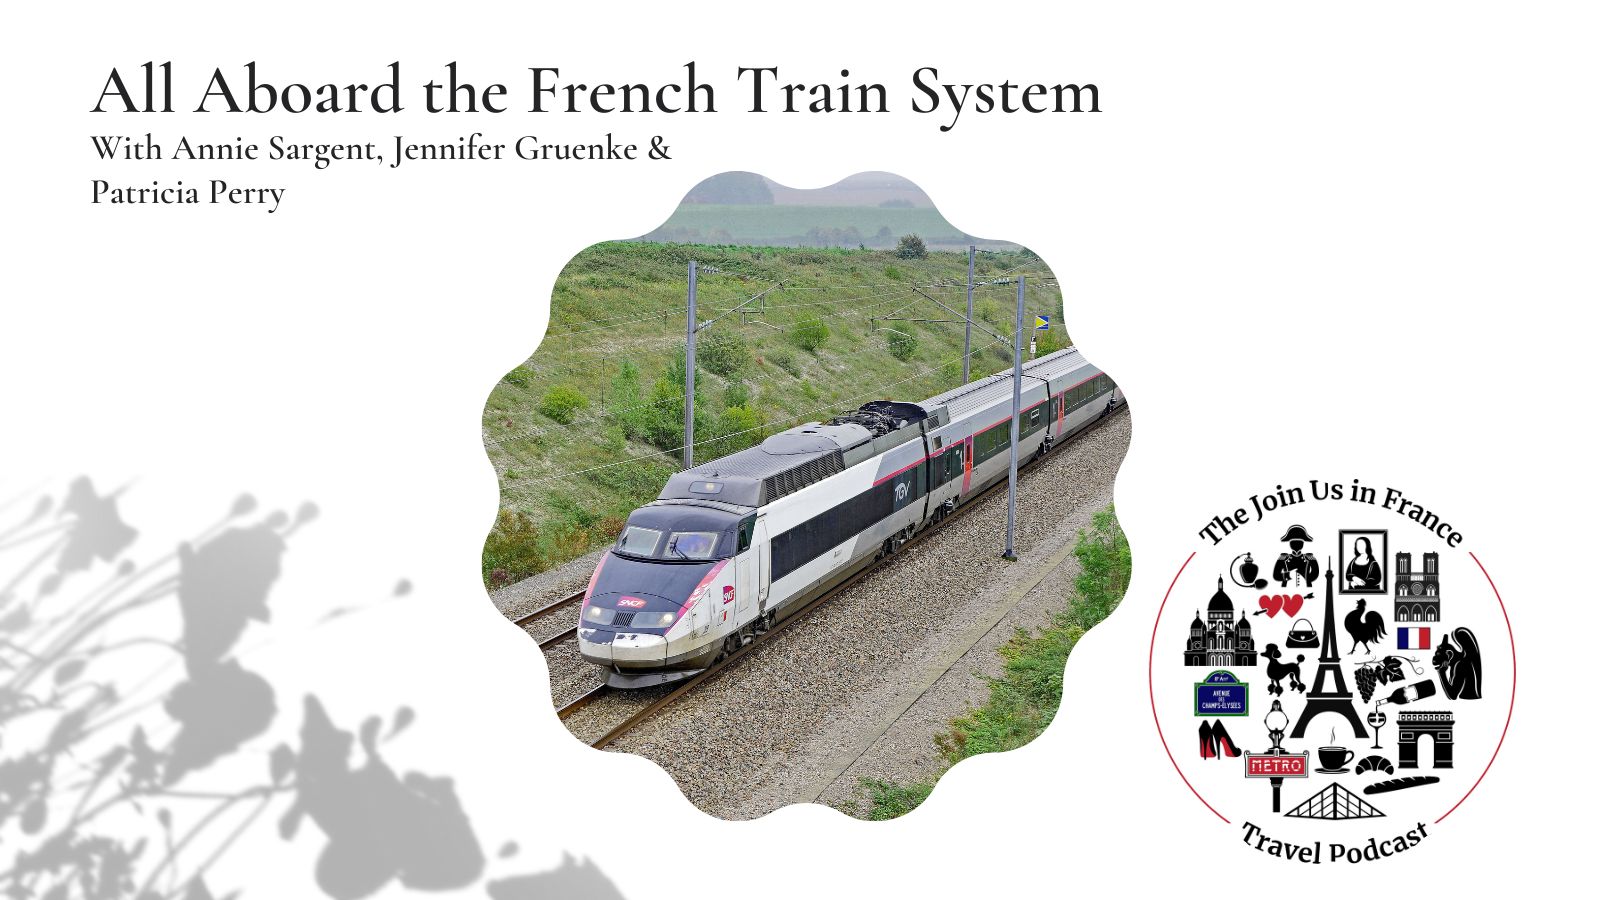 All Aboard the French Train System episode